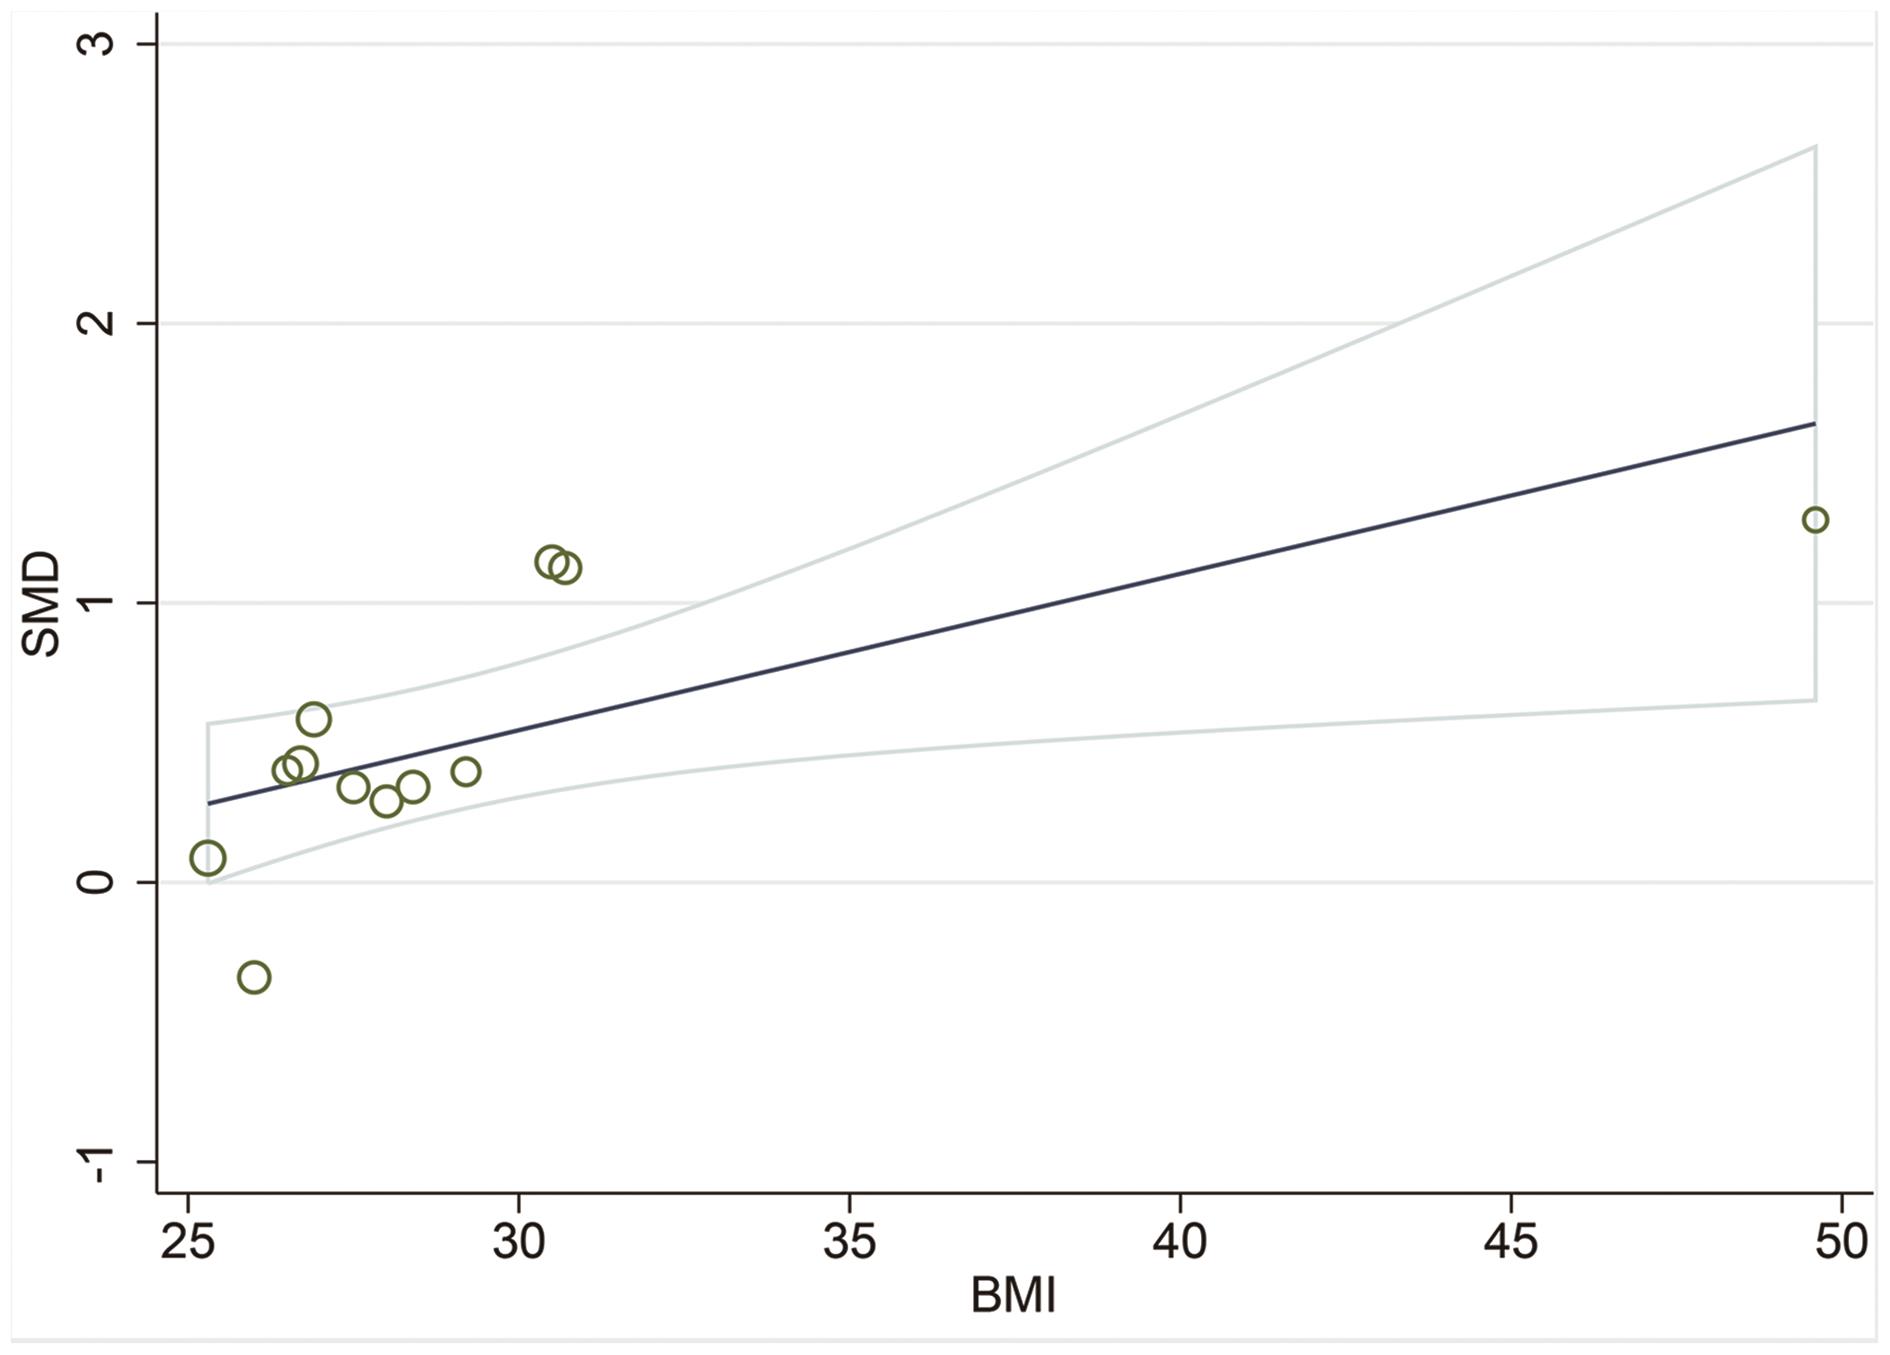 Meta-regression analysis for the effect of BMI on the NAFLD patients and healthy controls.